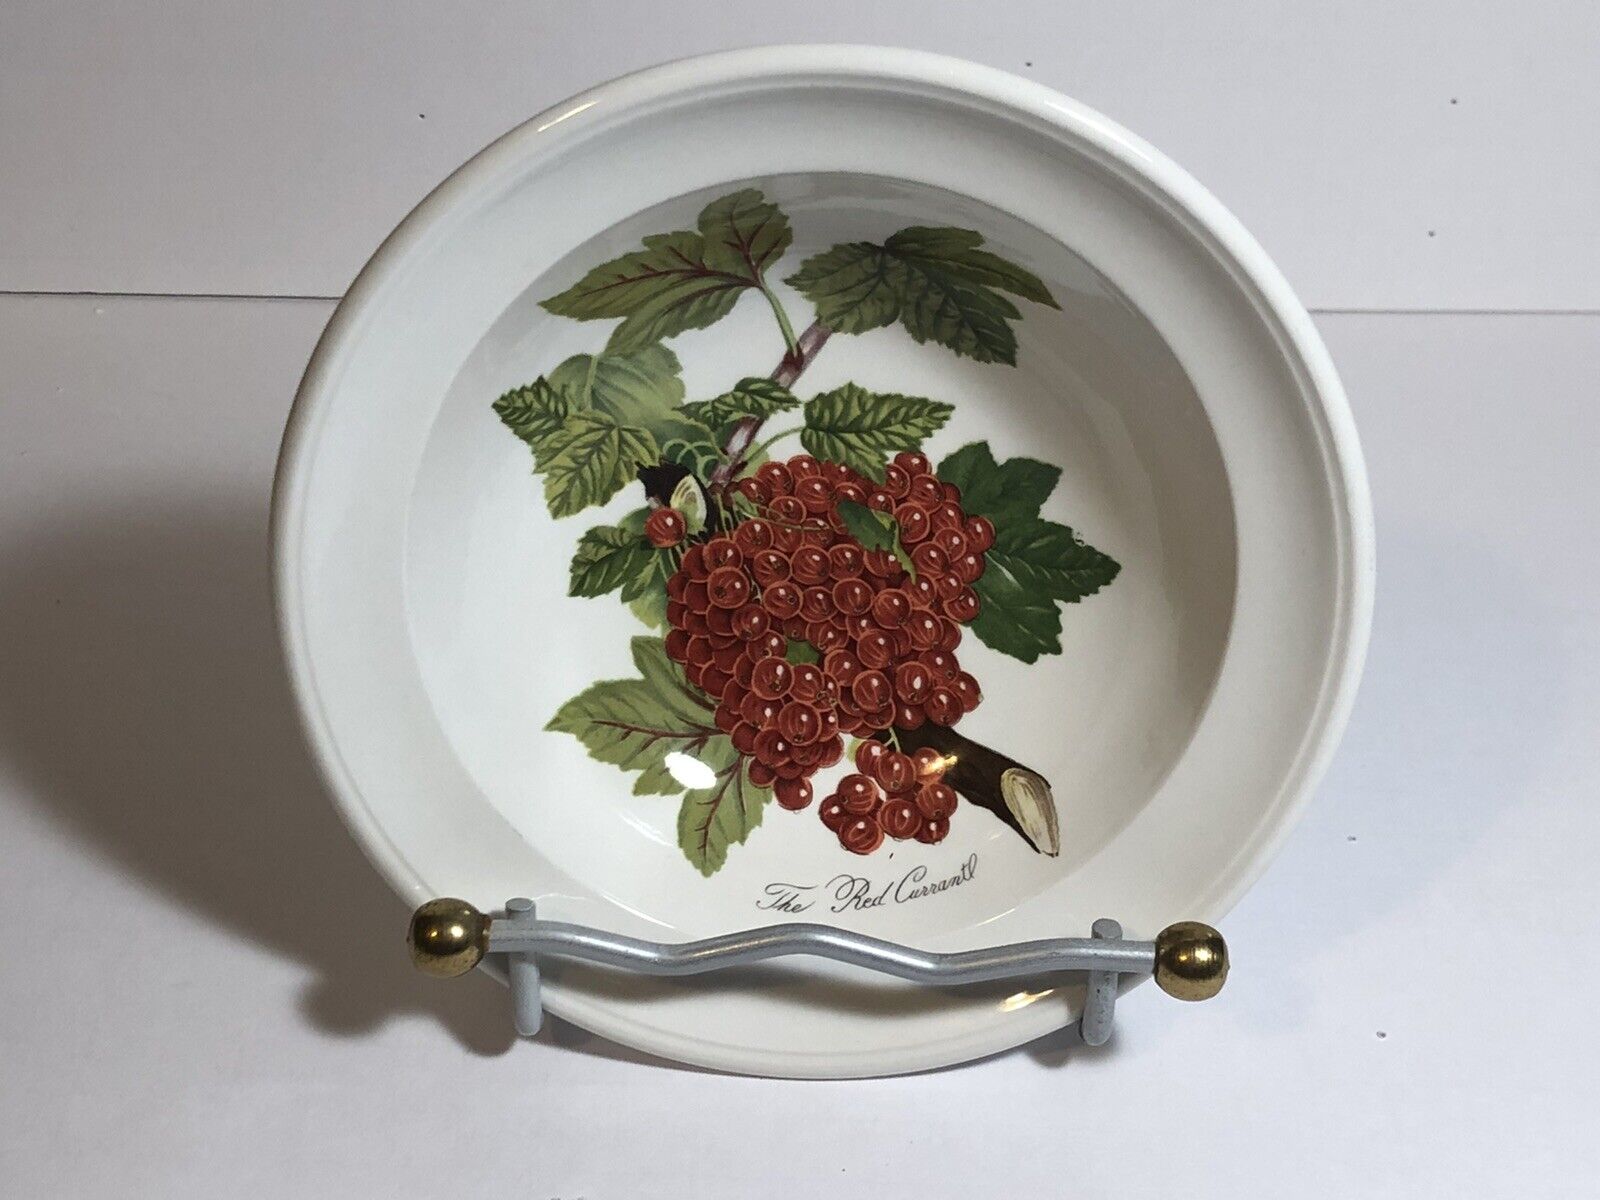 Pomona Portmeiron 6 3/4” Cereal Rim Bowl The Red Currant.